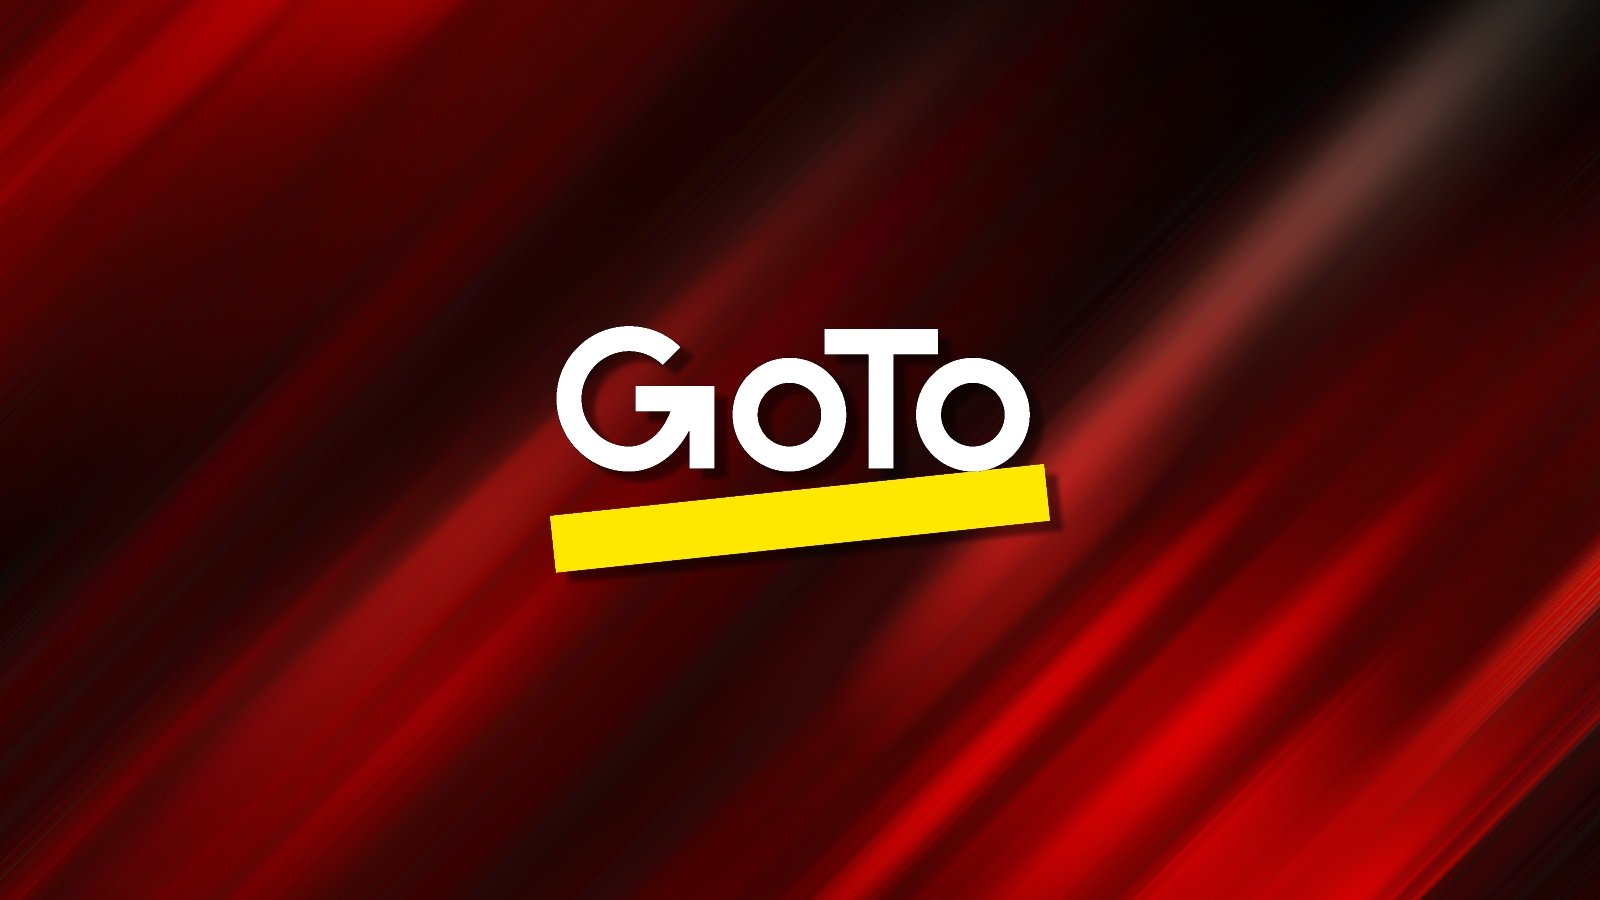 GoTo logo on a red background